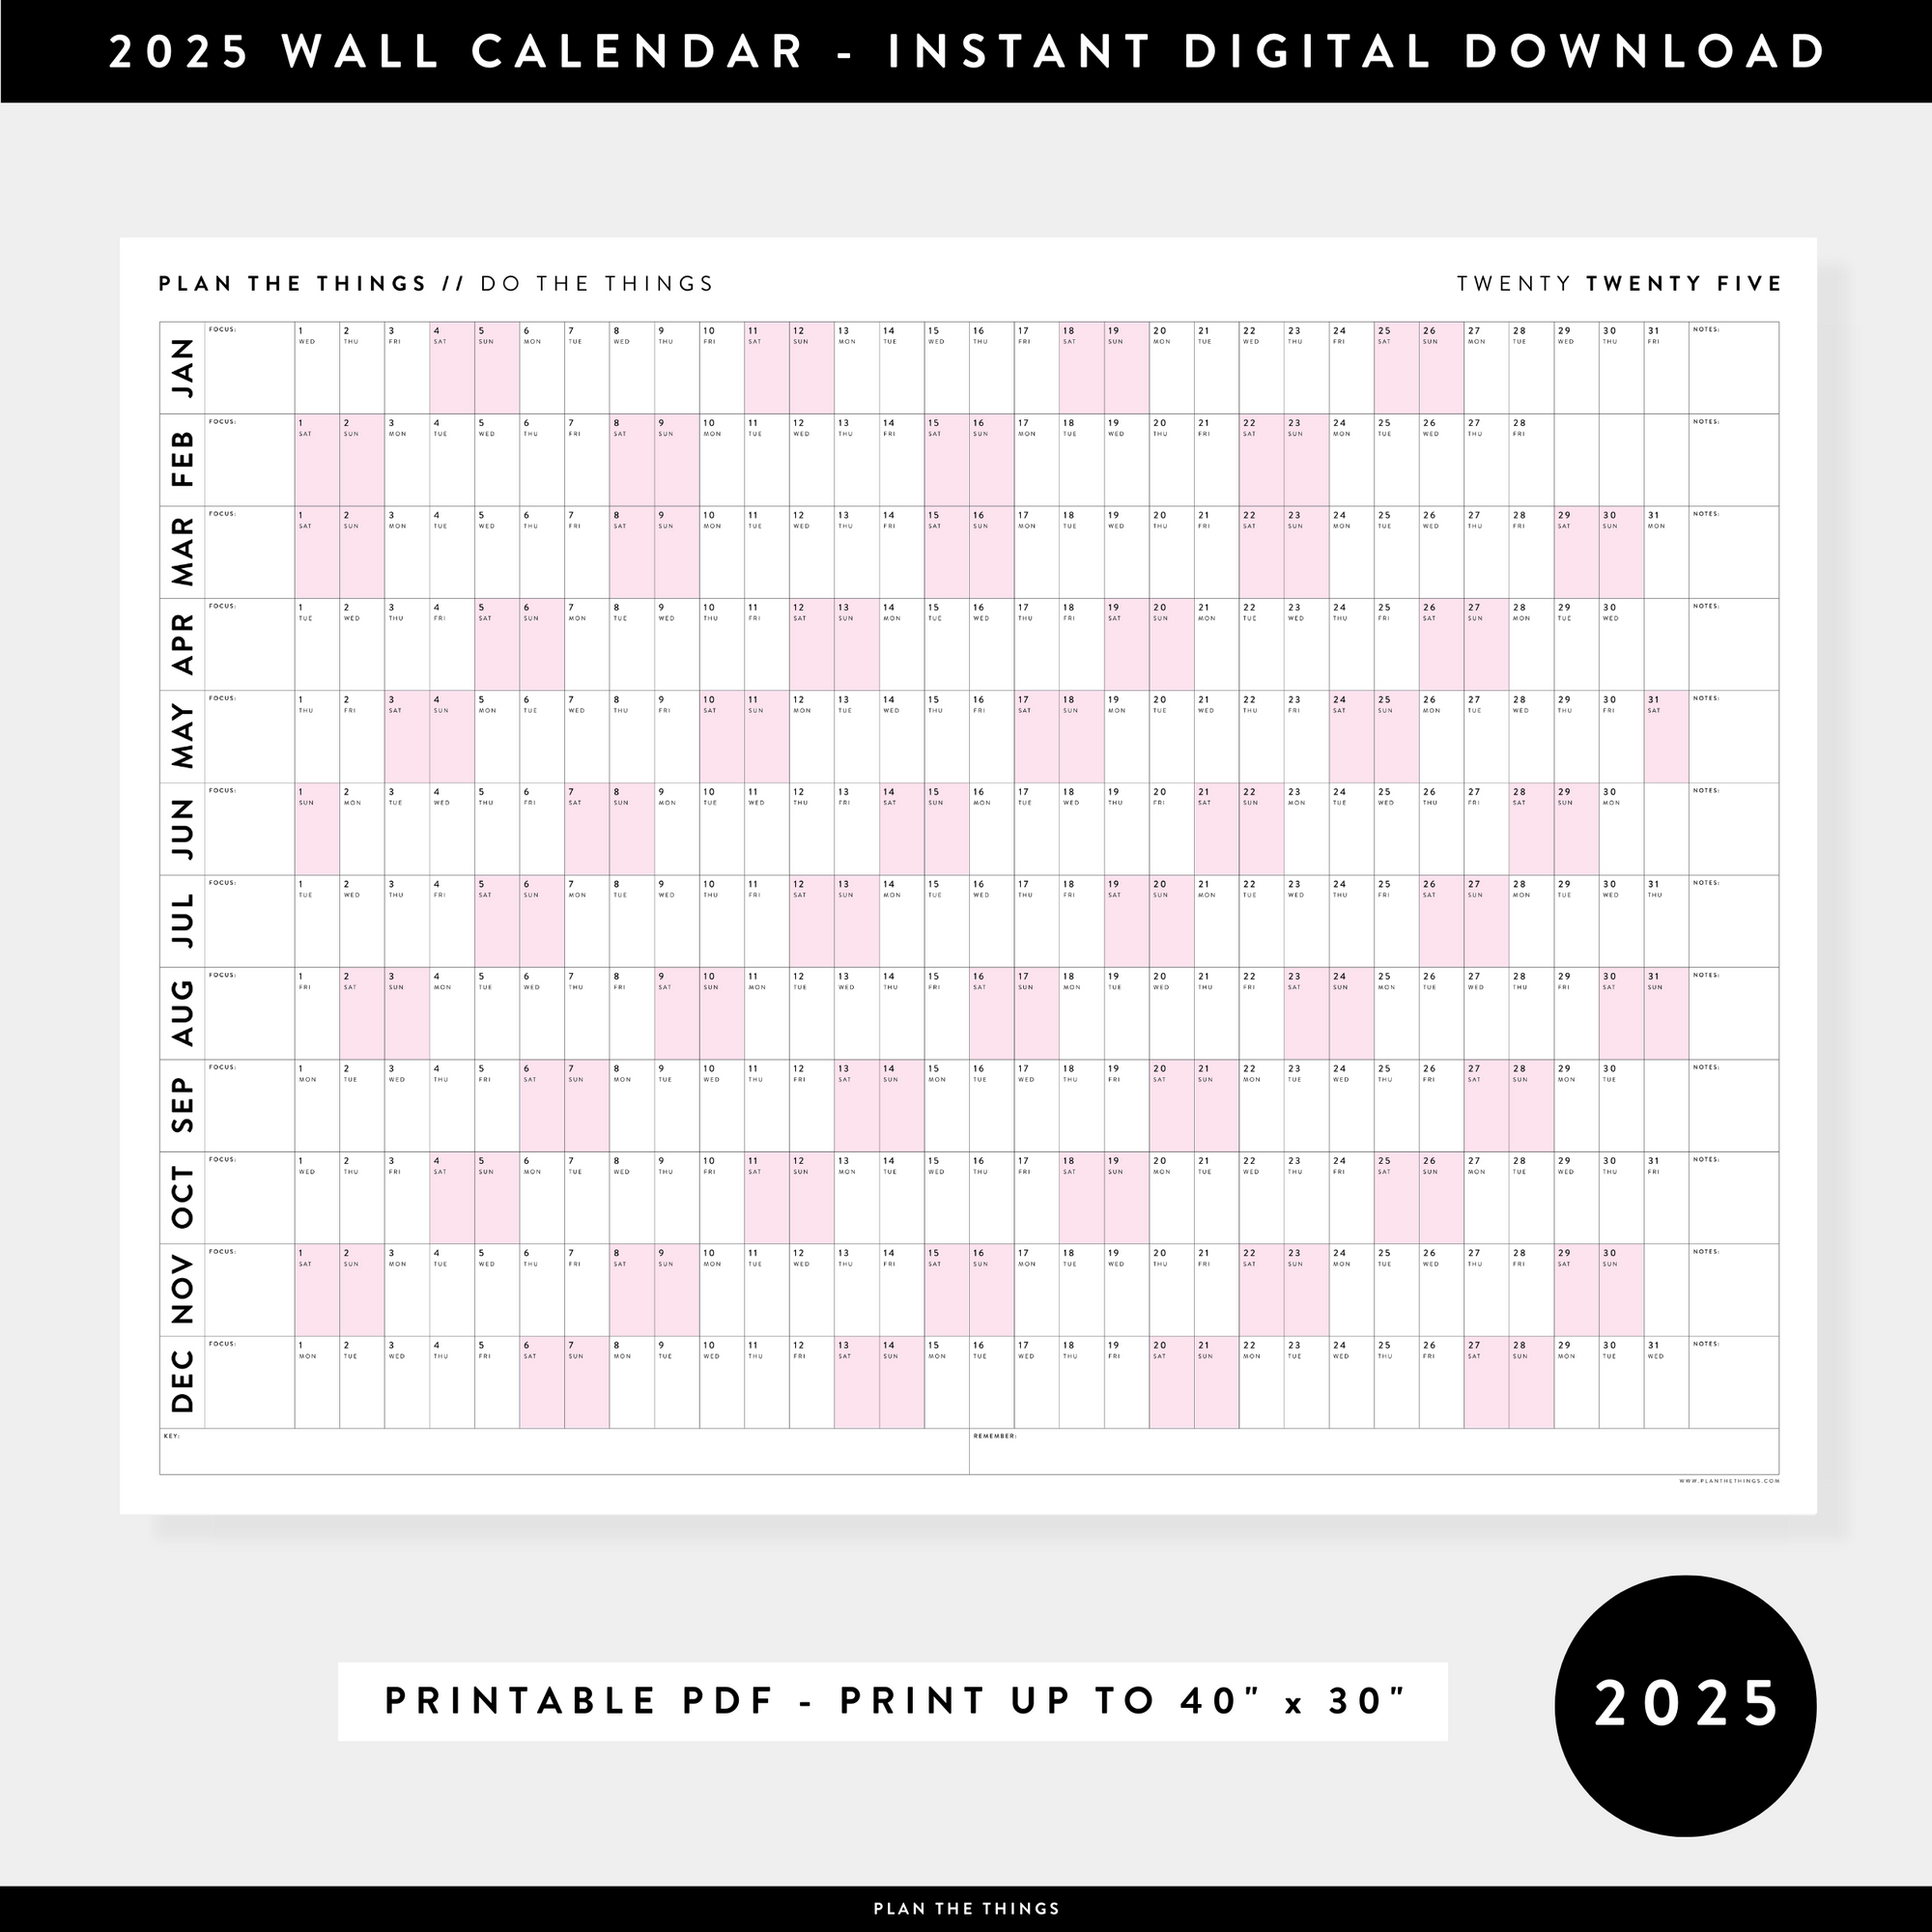 PRINTABLE 2025 HORIZONTAL WALL CALENDAR WITH PINK WEEKENDS - INSTANT DOWNLOAD